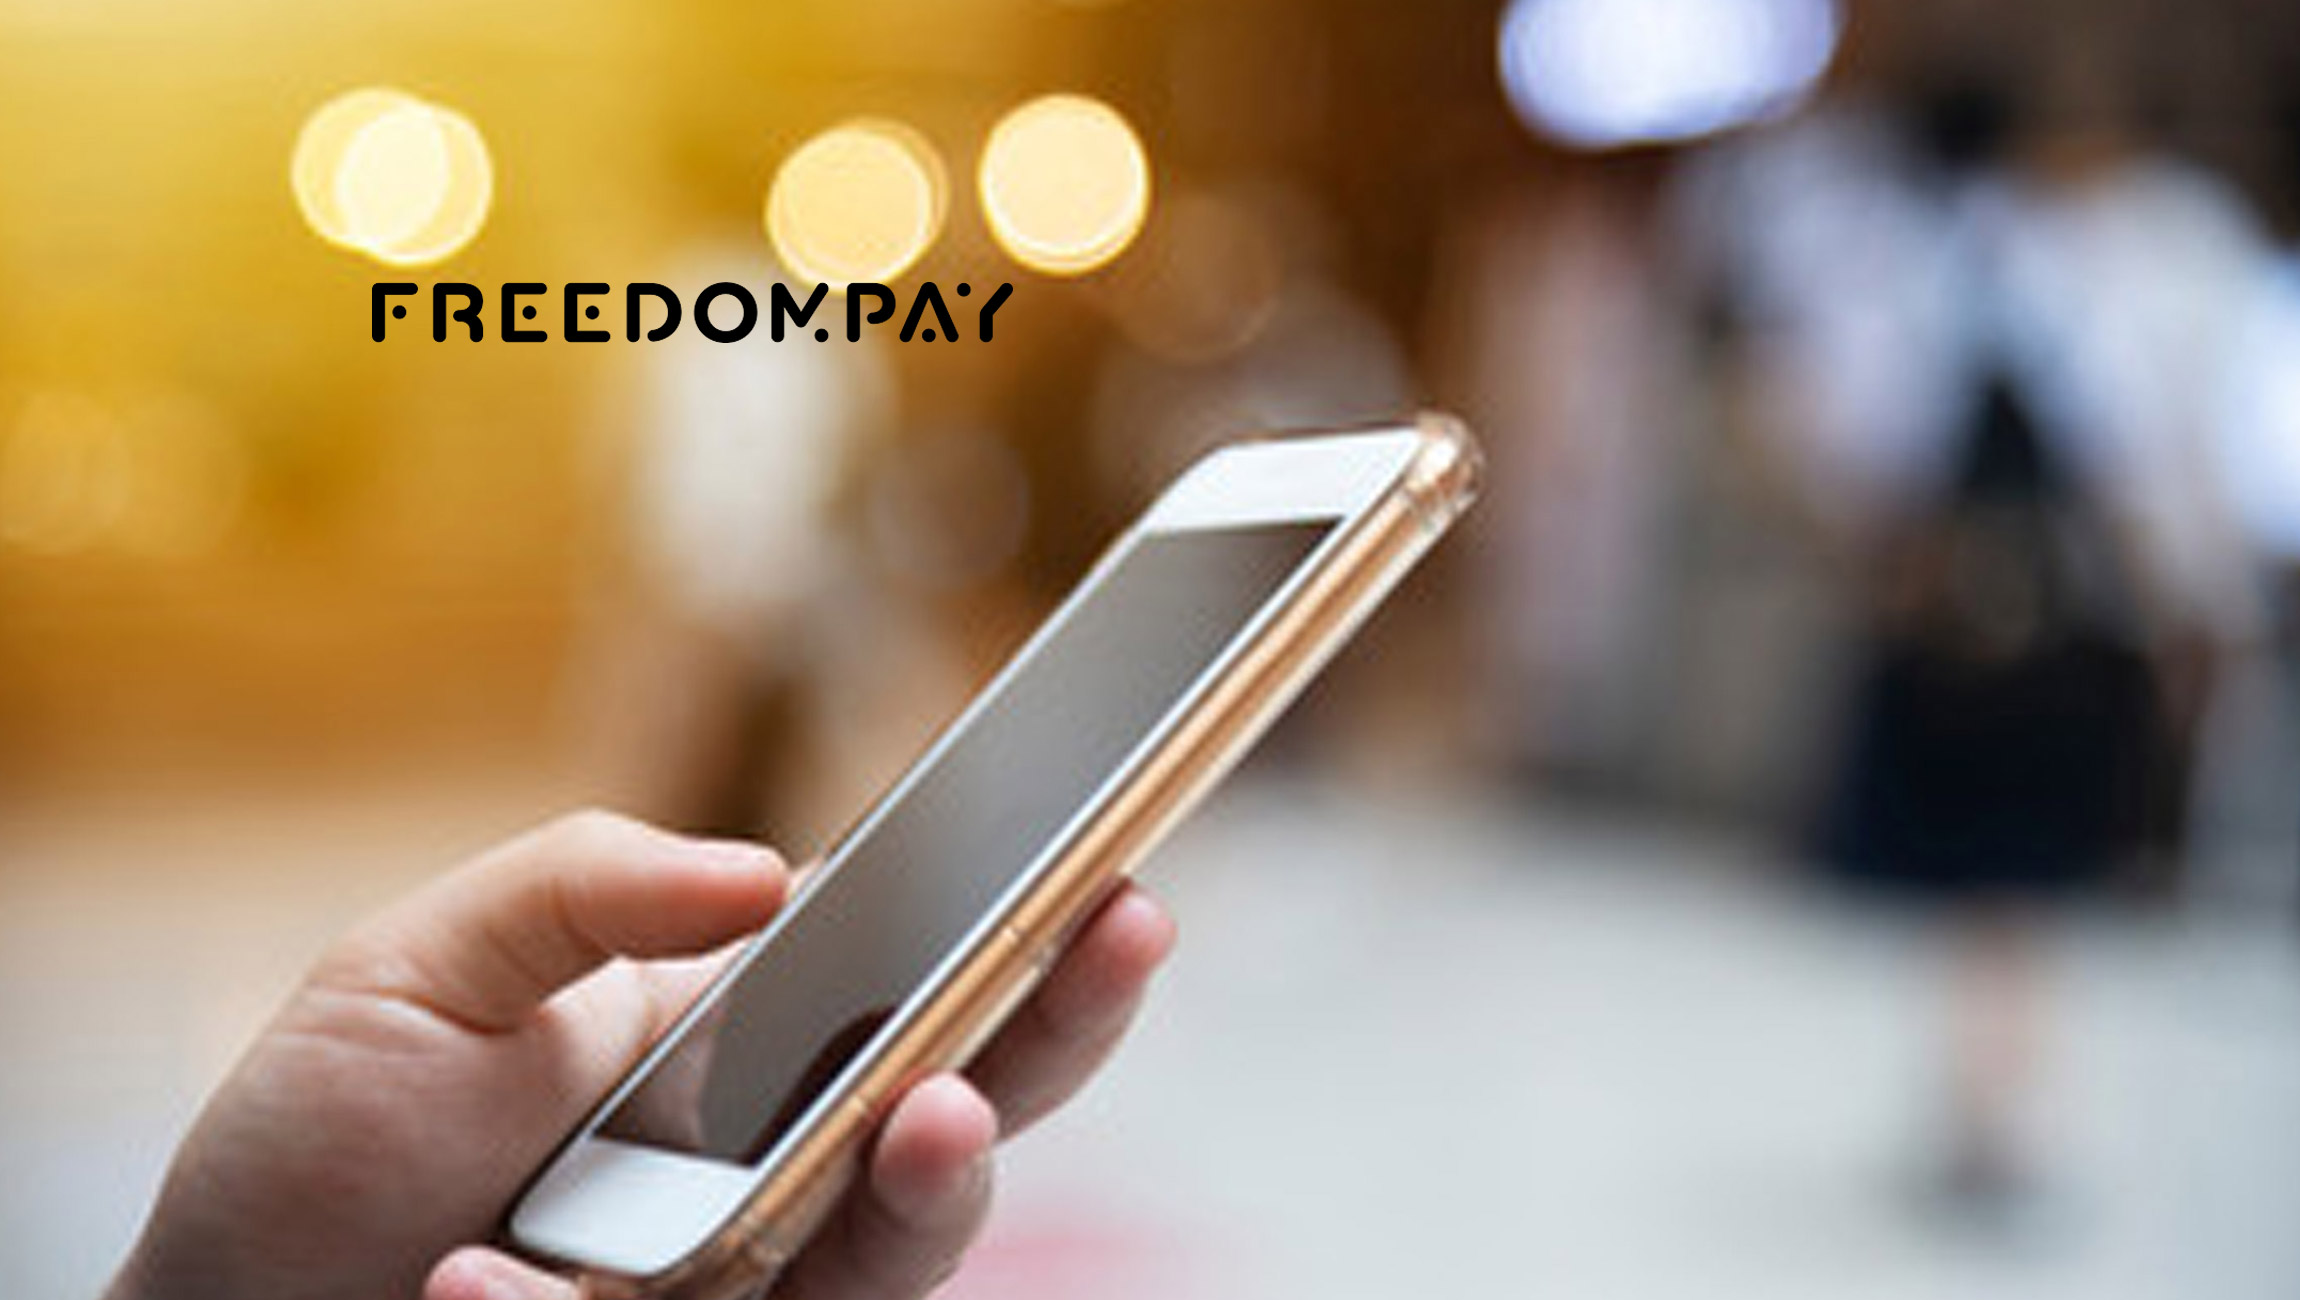 FreedomPay to Unleash the Power of Pay at NRF 2023